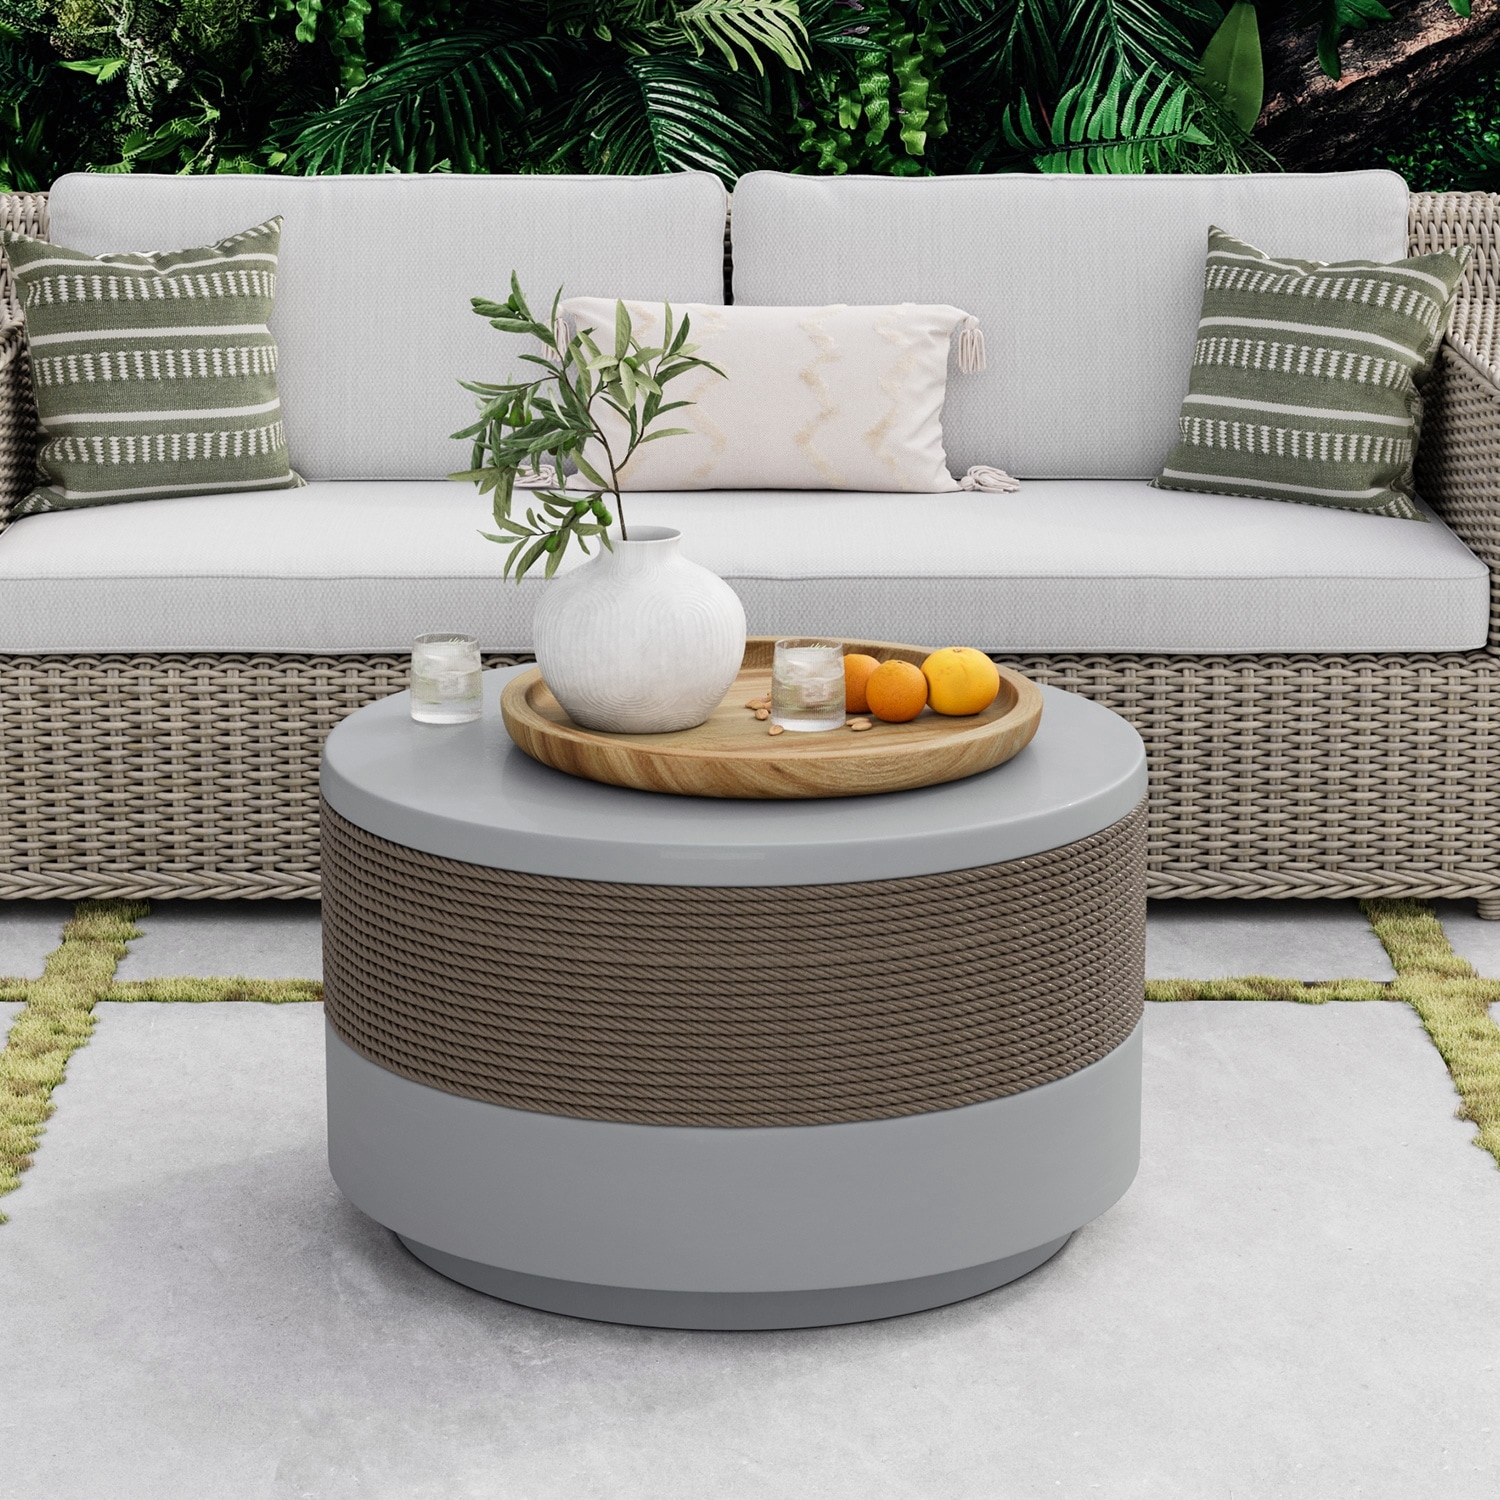 https://ak1.ostkcdn.com/images/products/is/images/direct/9b47c18ed5db732b33da1daaa091f3baf8bb661d/COSIEST-Outdoor-Patio-MgO-Coffee-Table%2C-Side-Table%2C-End-Table.jpg